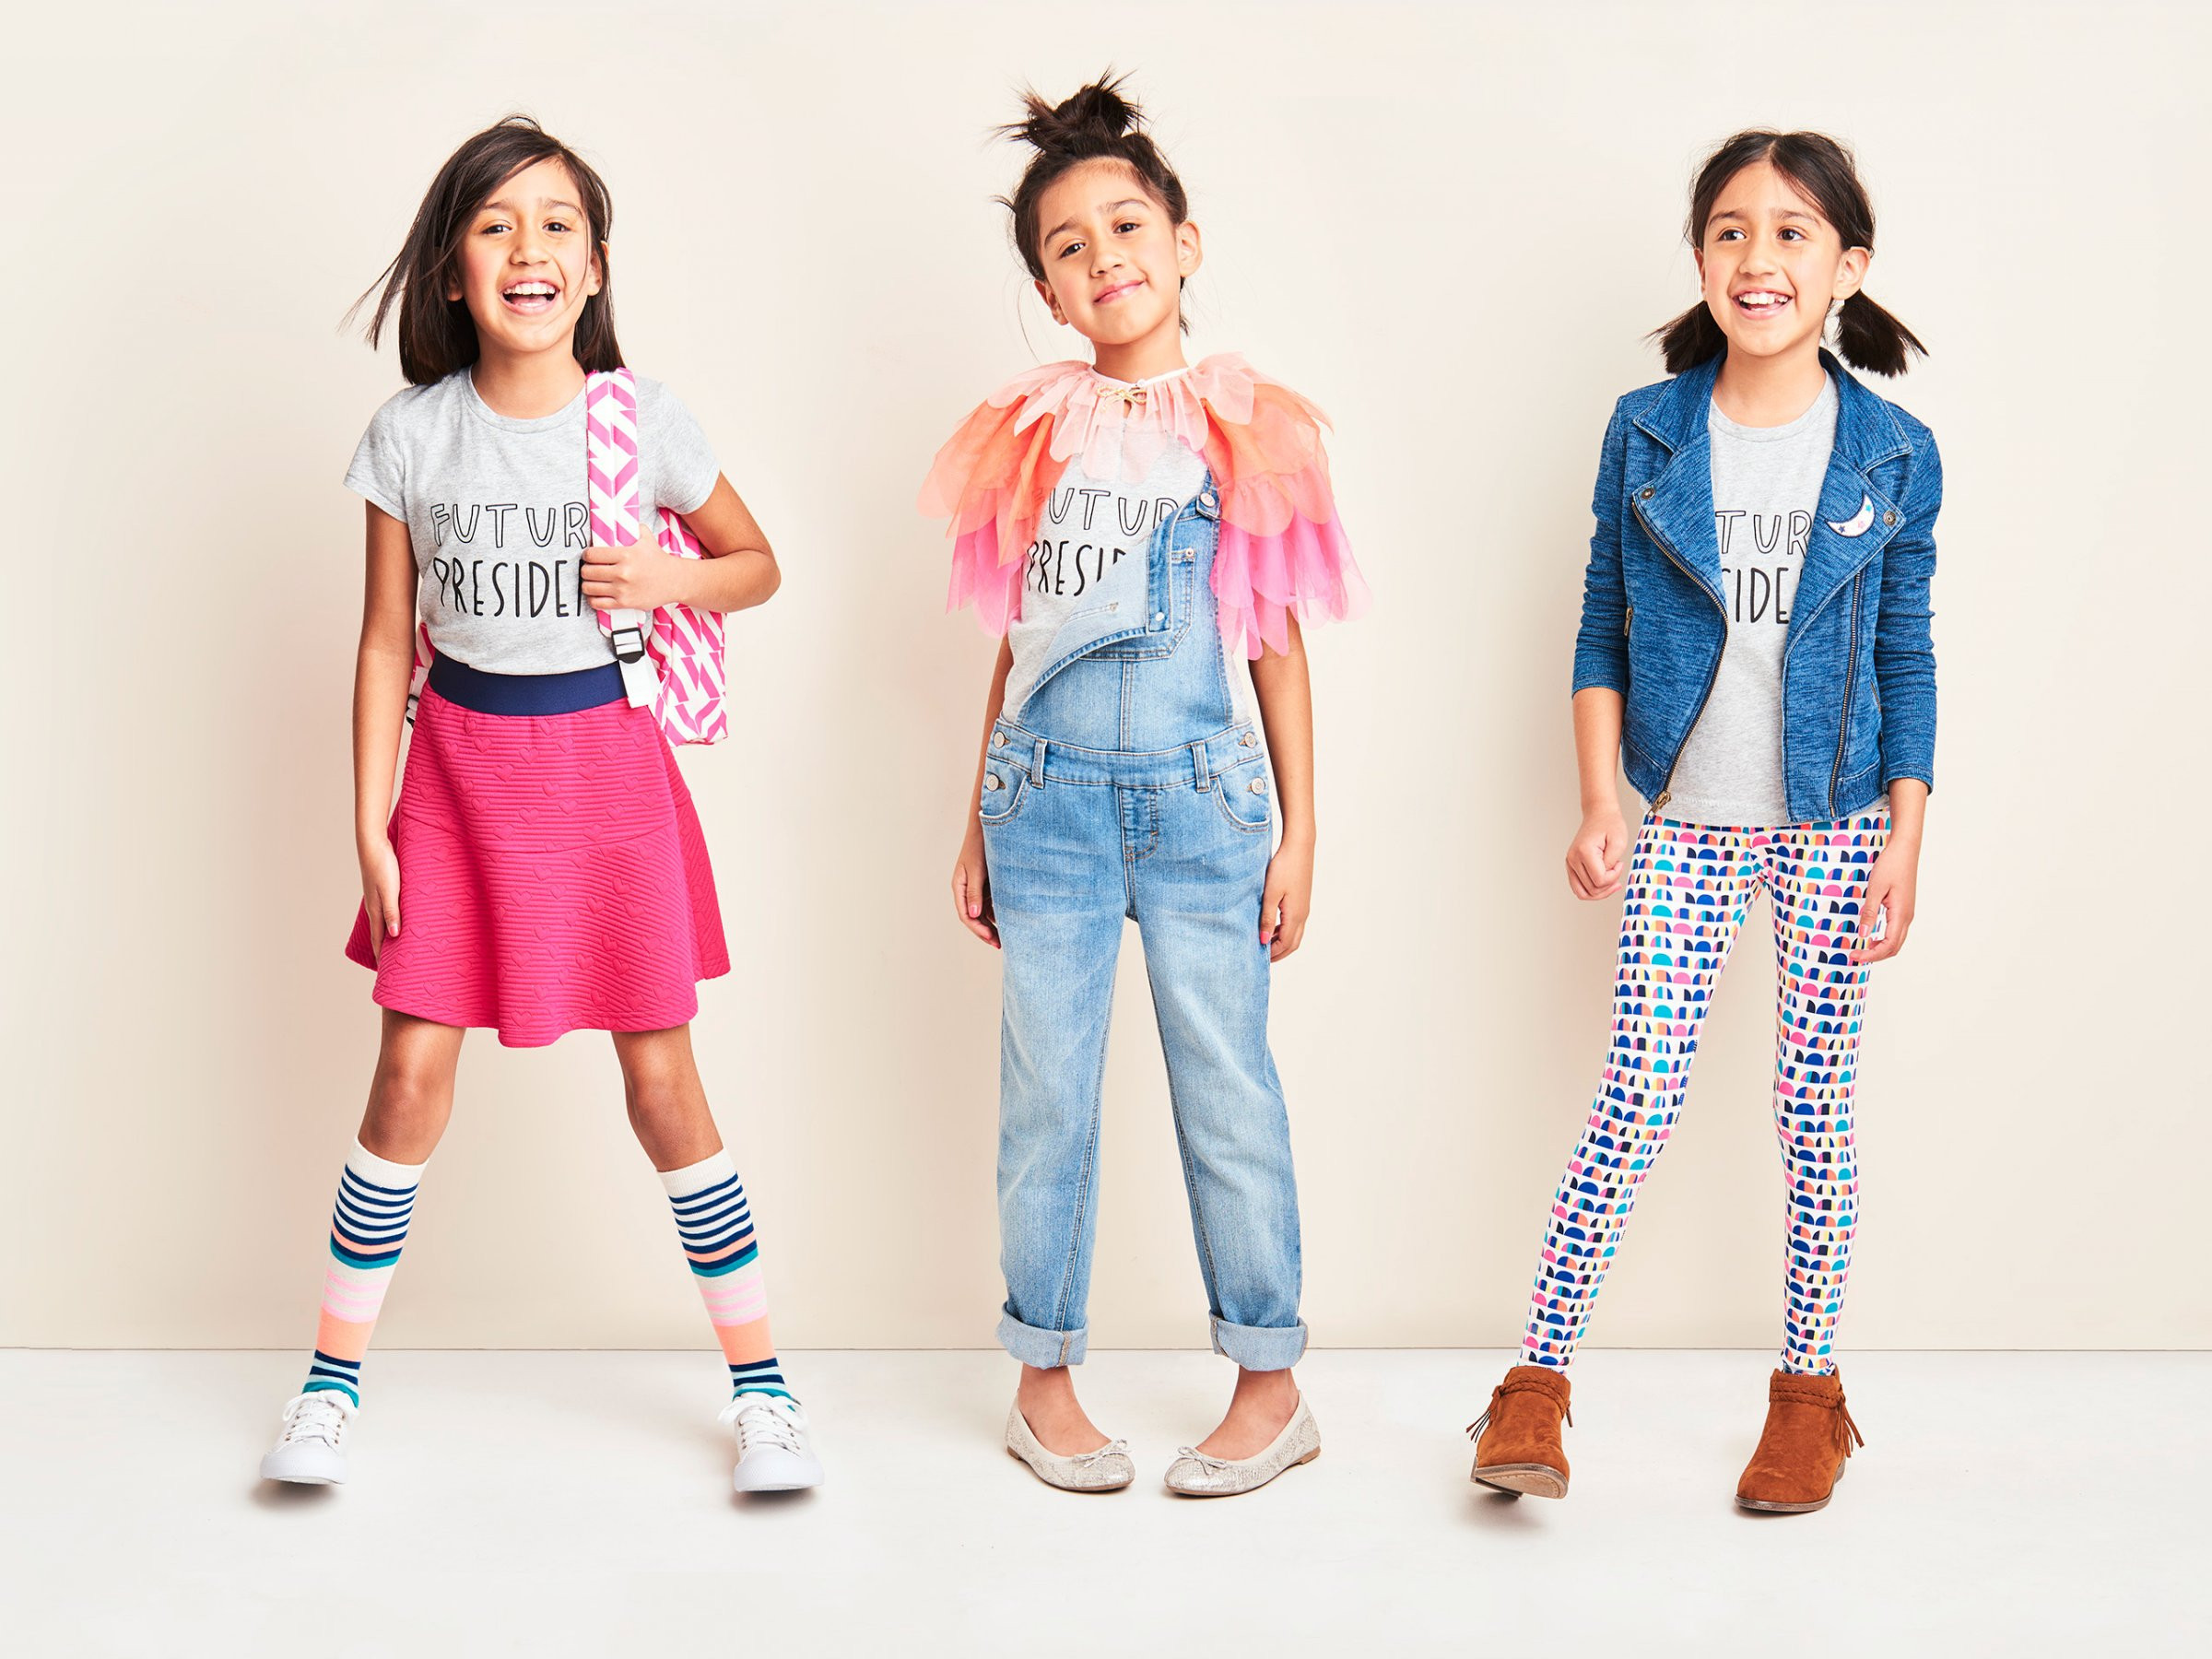 Children Fashion Clothes
 Today in awesome Tar debuts new kids clothing line